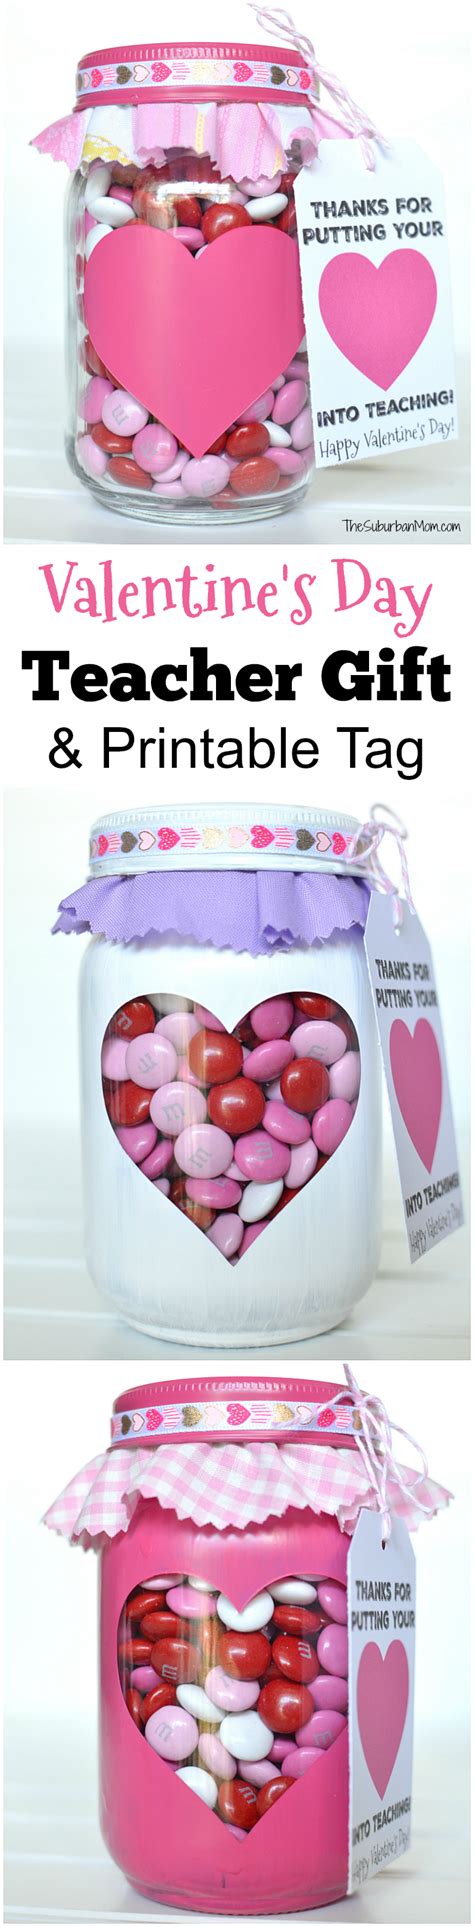 20 Ideas For Valentines Day Ts For Teachers Best Recipes Ideas And